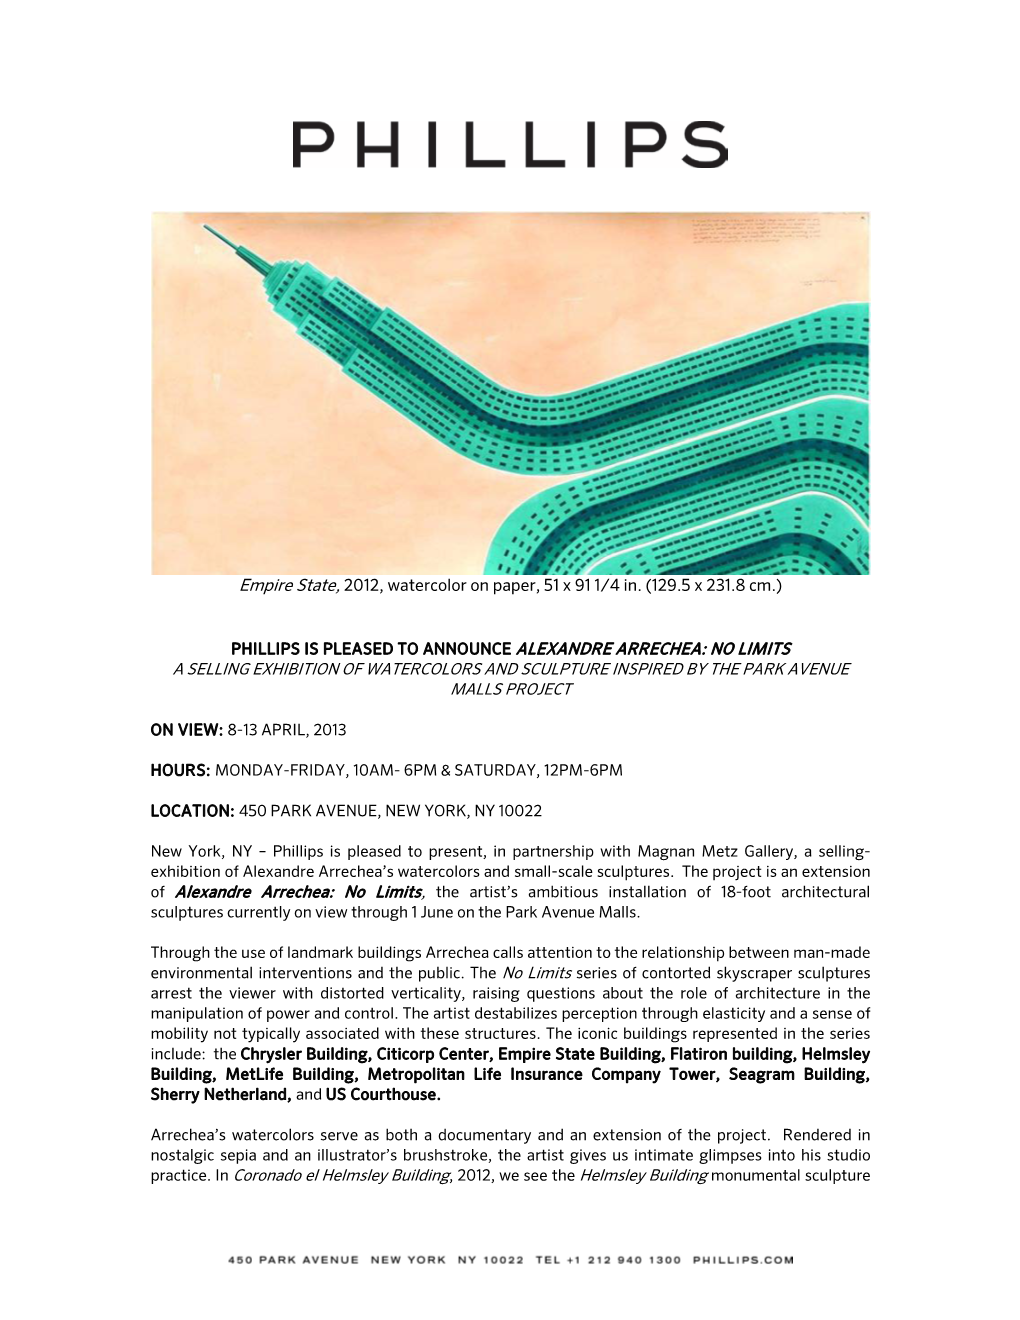 Phillips Is Pleased to Announce Alexandre Arrechea: No Limits a Selling Exhibition of Watercolors and Sculpture Inspired by the Park Avenue Malls Project